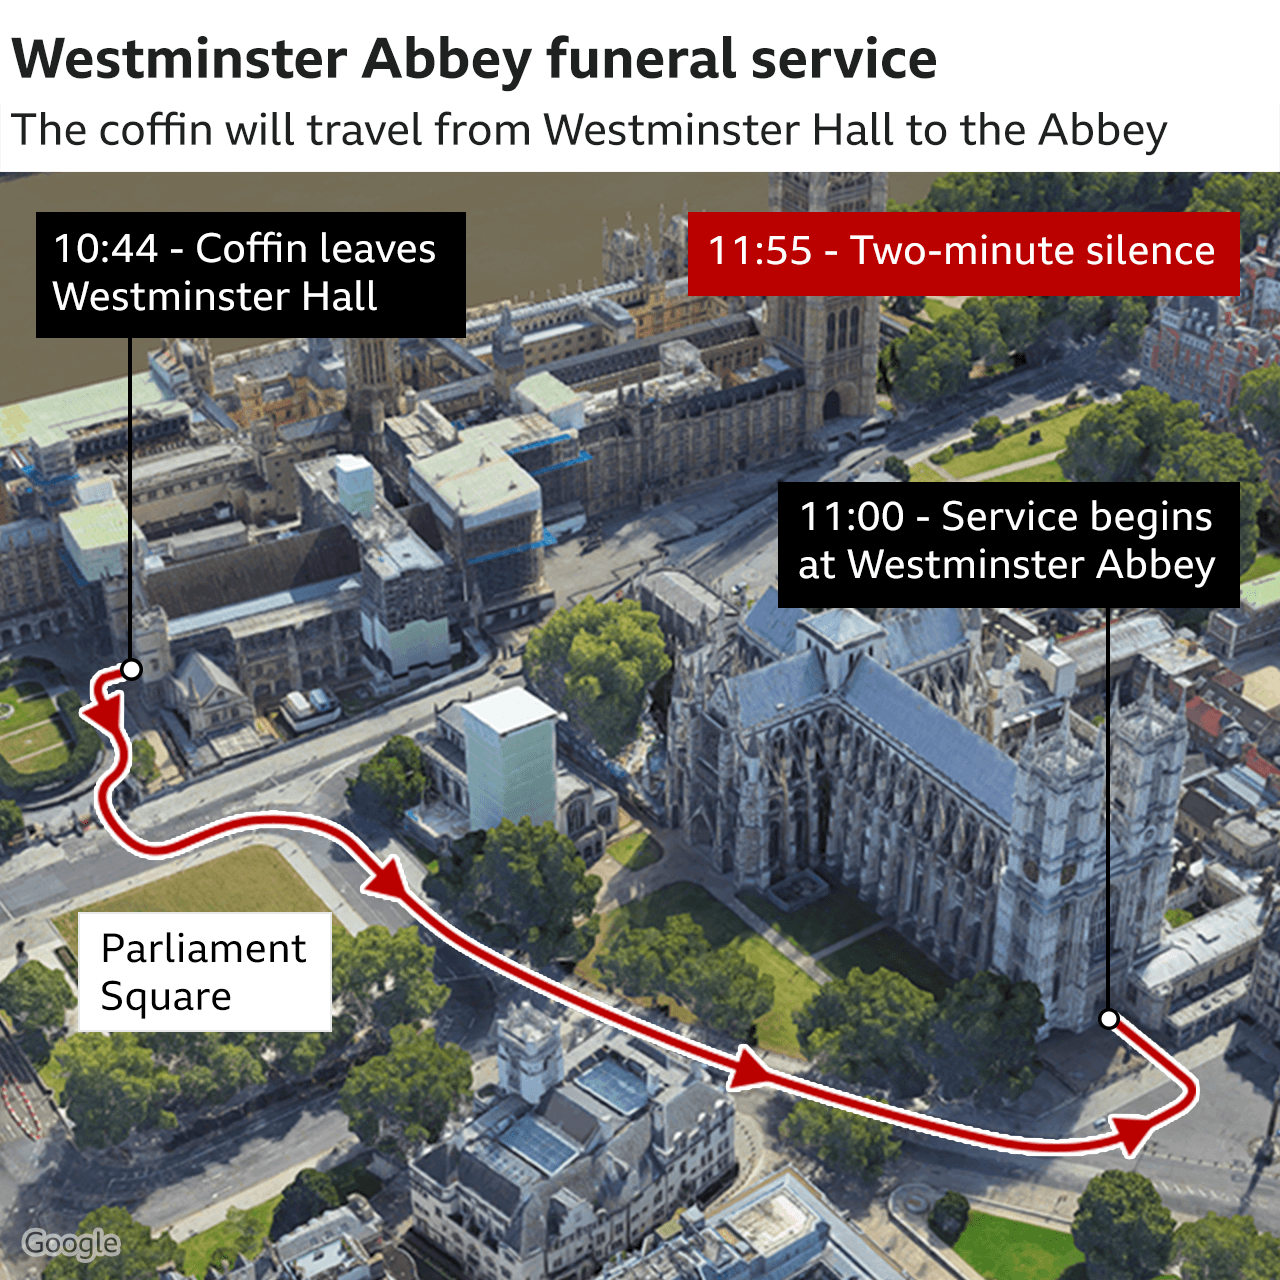 Map showing the procession route from Westminster Hall to the Abbey